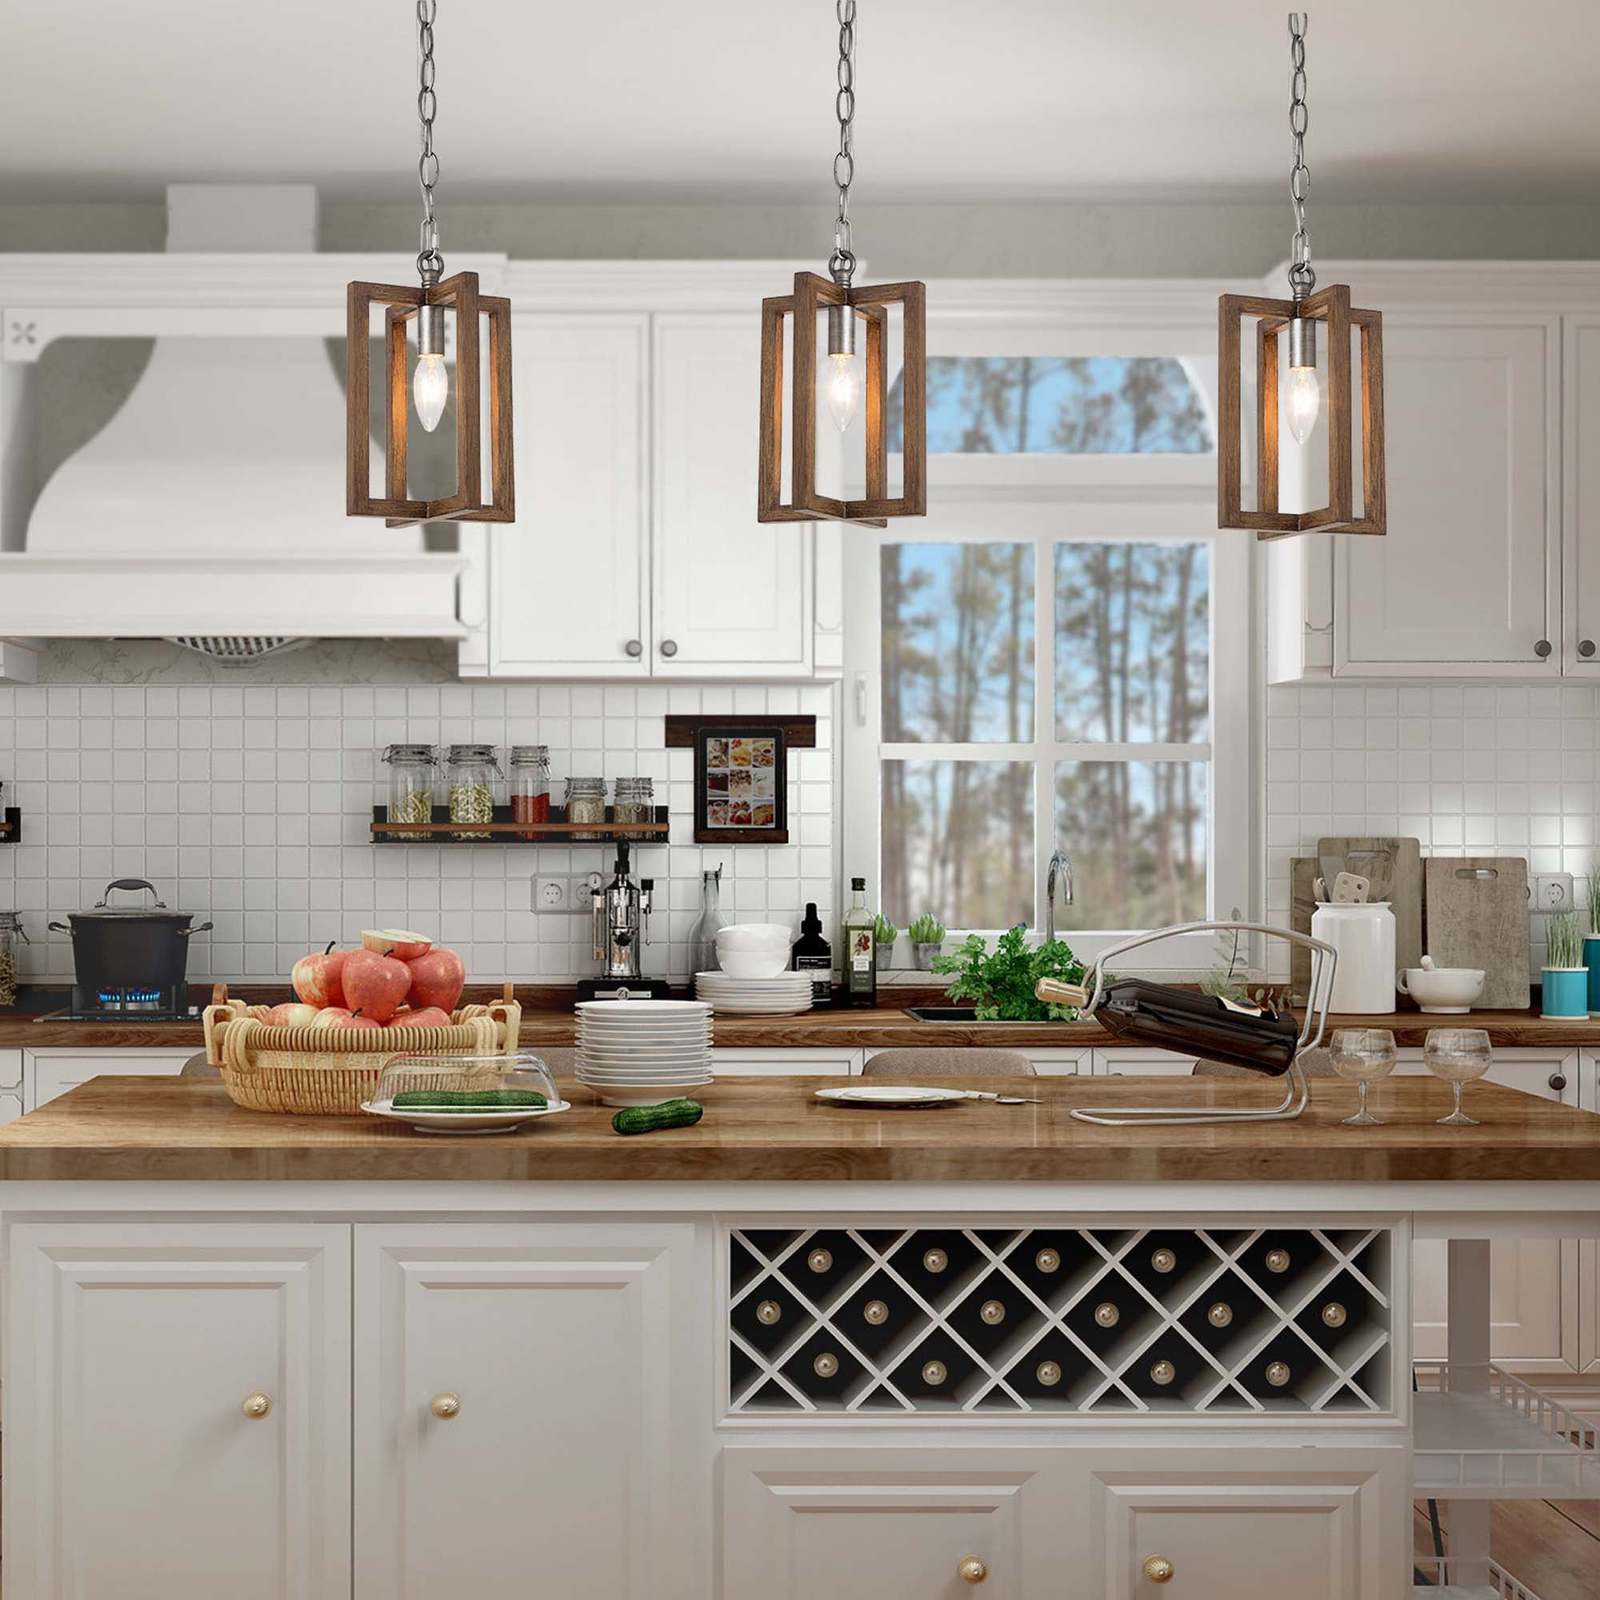 20 Kitchen Island Lighting Ideas for Every Style